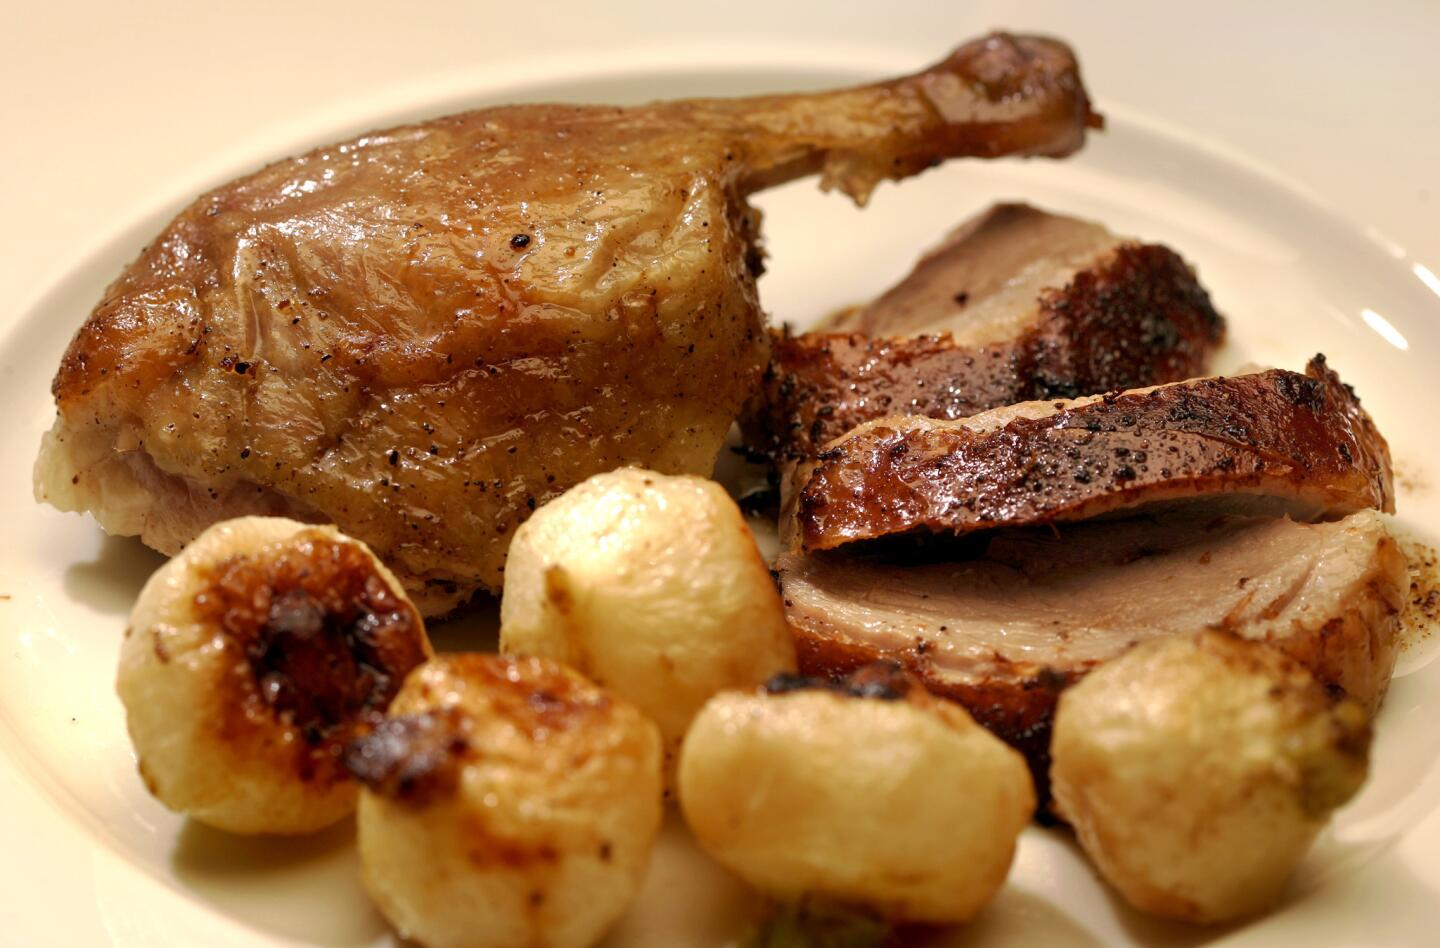 Crispy spiced duck with roasted baby turnips